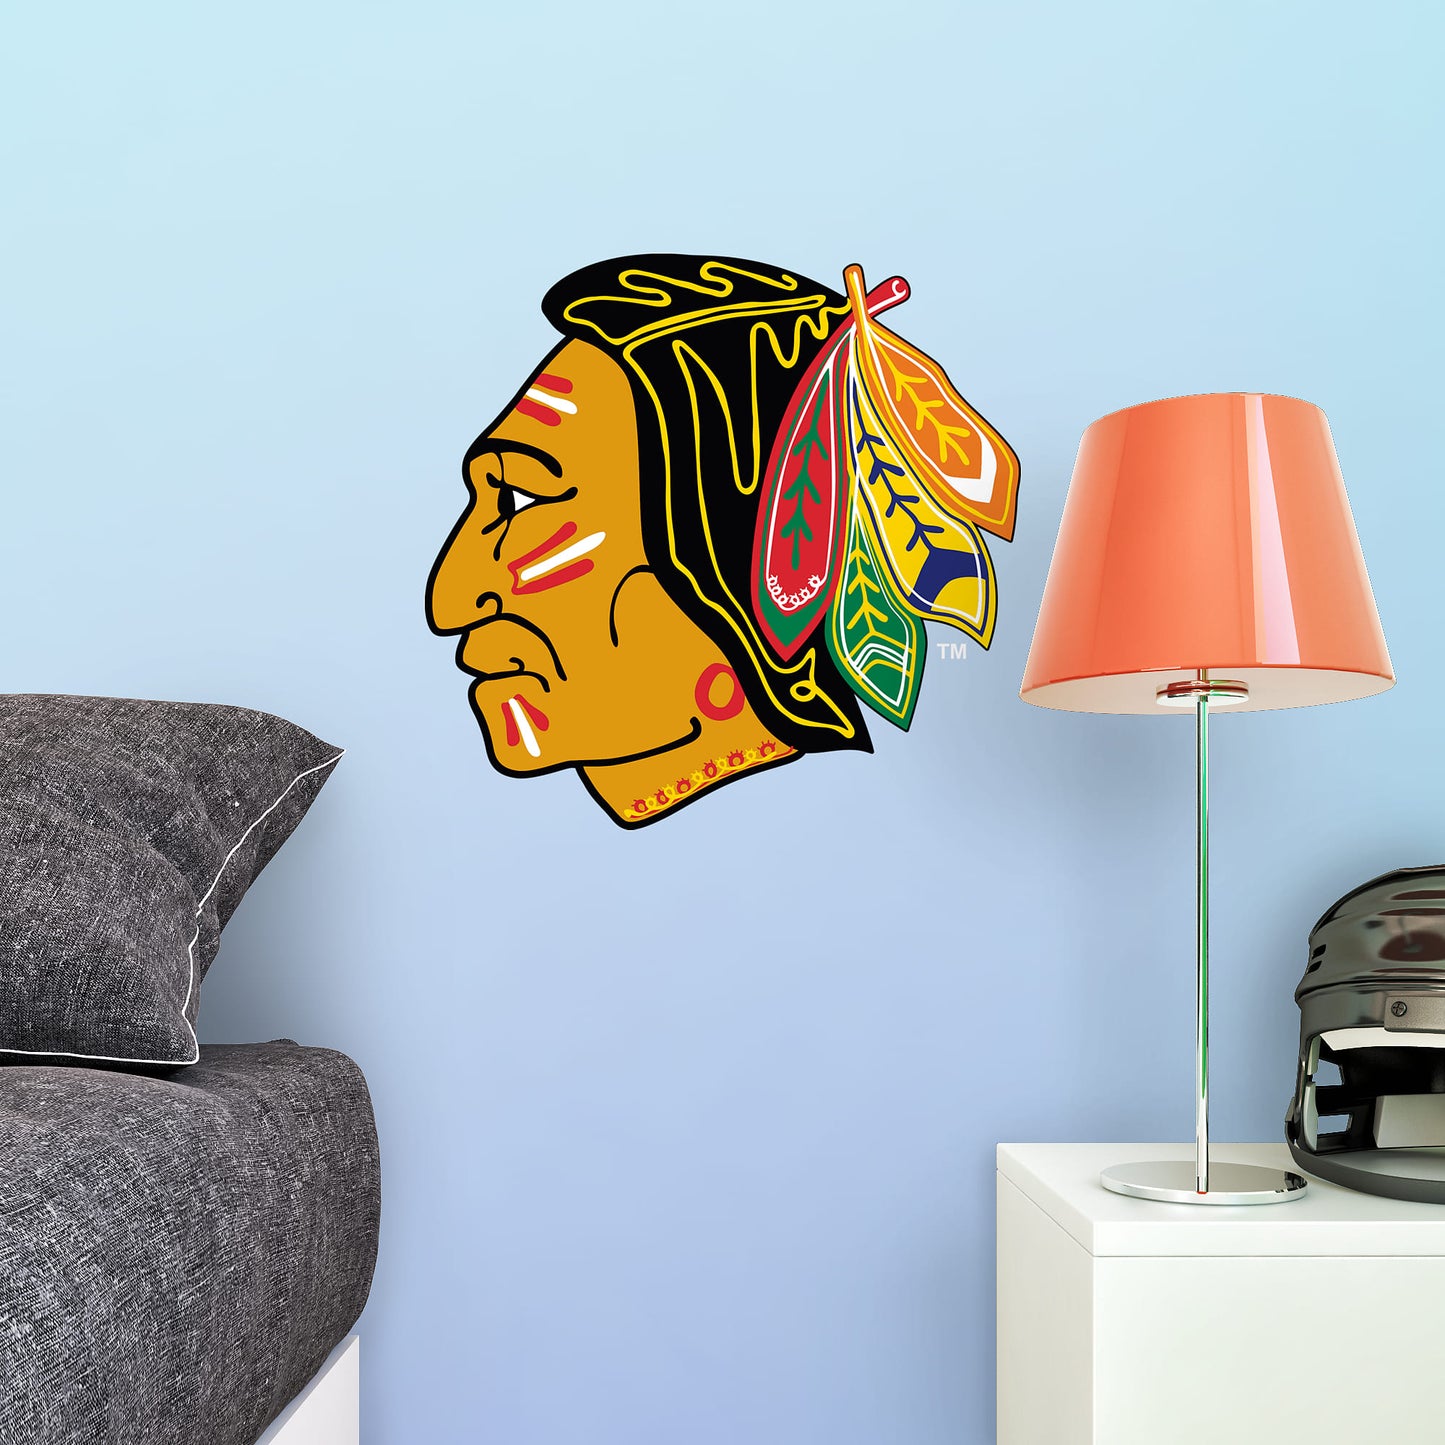 Chicago Blackhawks: 2017 Winter Classic Logo - Officially Licensed NHL Removable Wall Decal